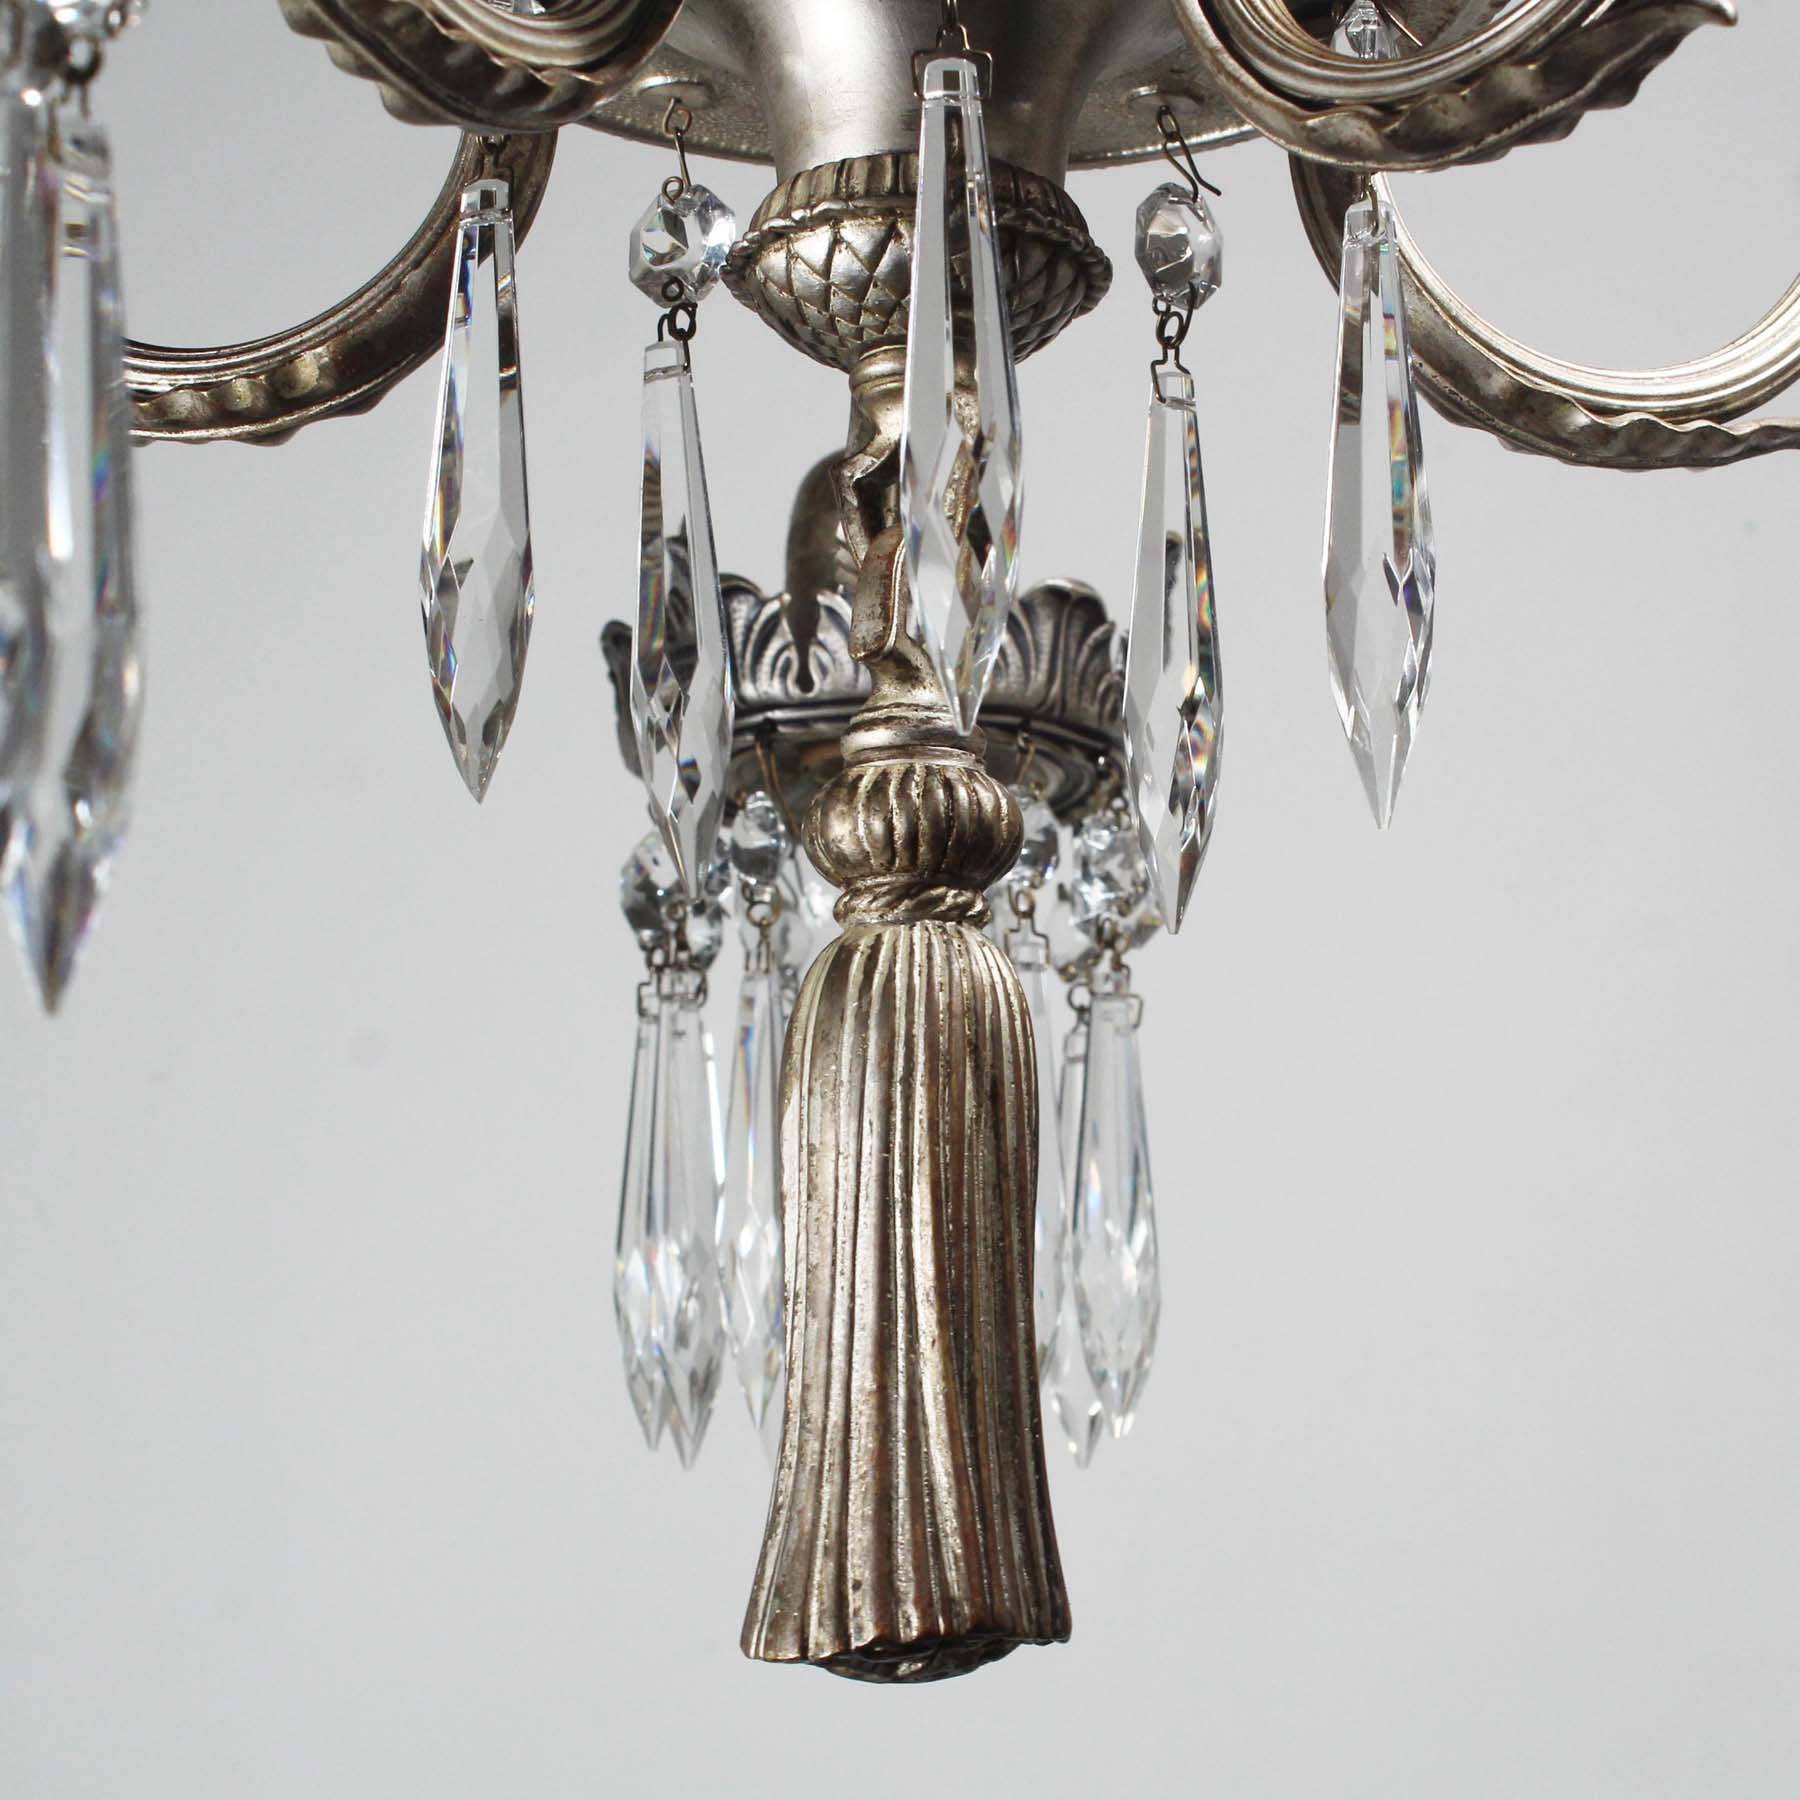 SOLD Antique Neoclassical Silver Plate Chandelier with Prisms-71844